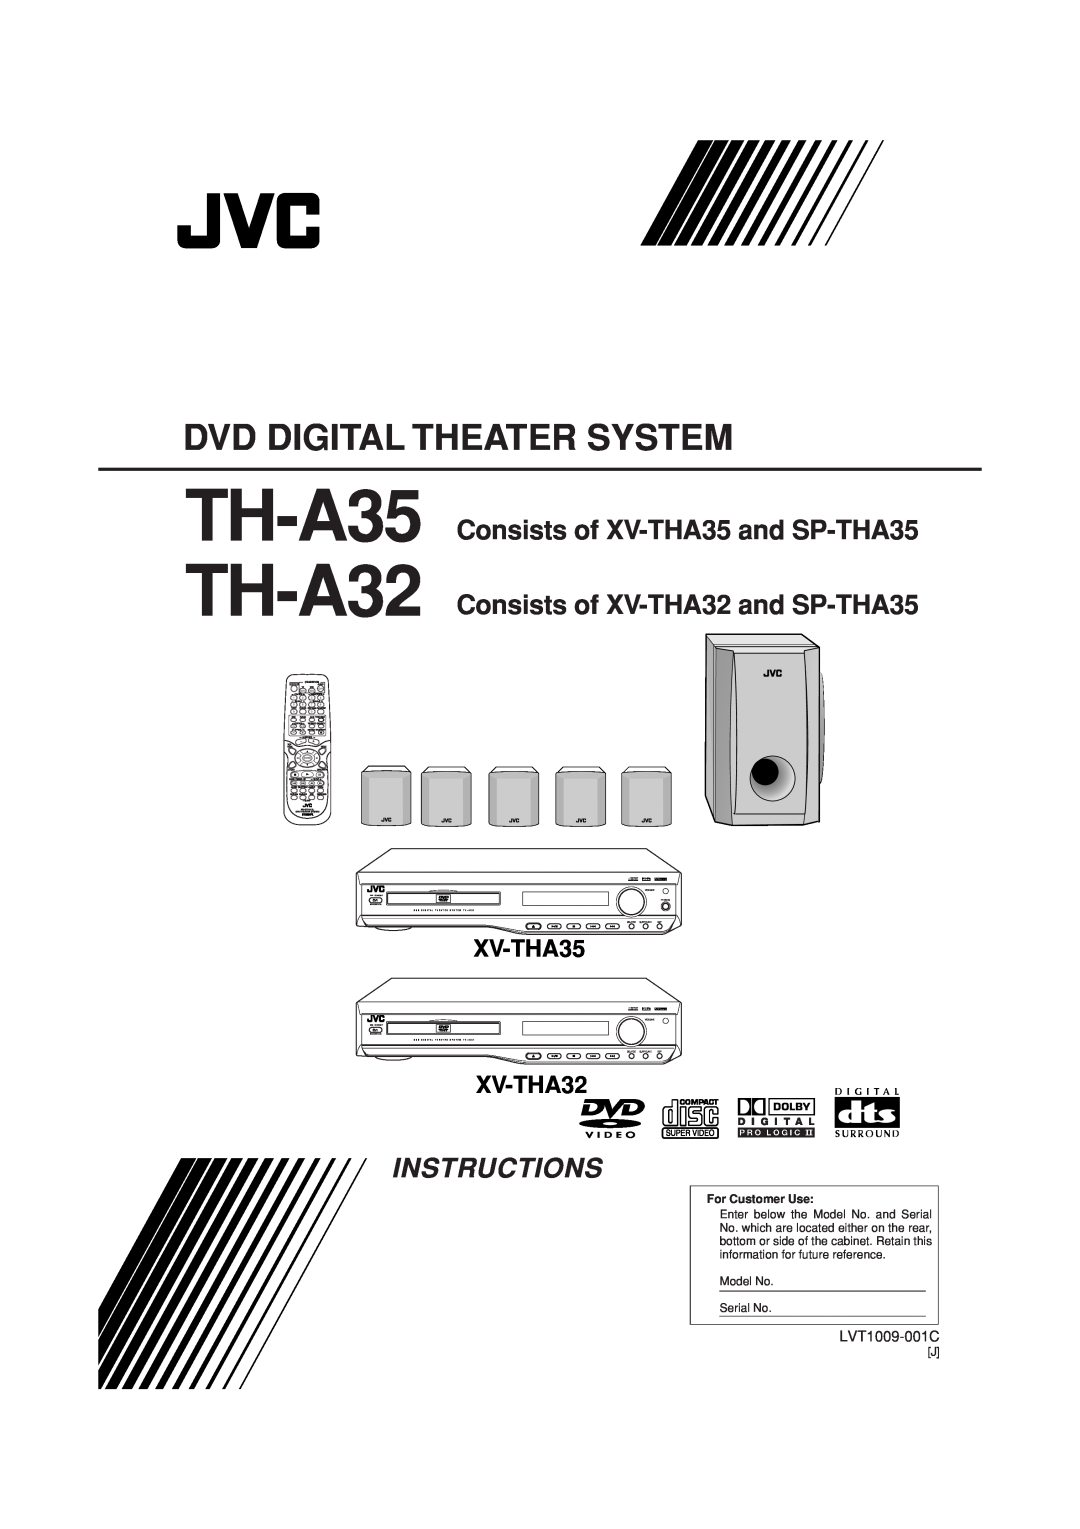 JVC manual Consists of XV-THA35and SP-THA35, Consists of XV-THA32and SP-THA35, TH-A35 TH-A32, Instructions, Sound 